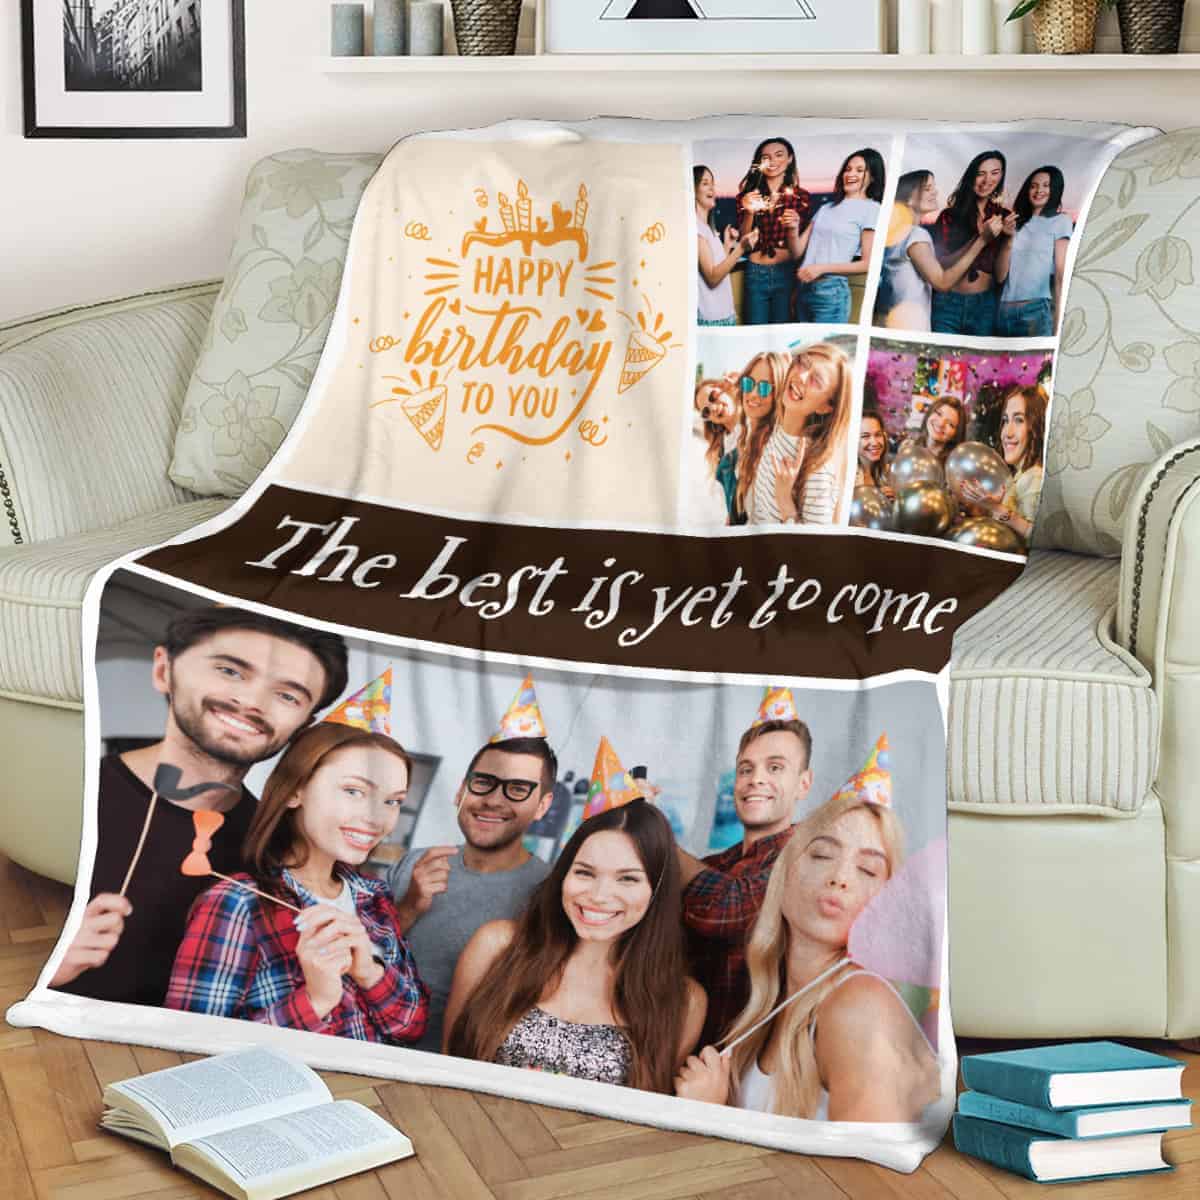 40th birthday gifts for men: Happy Birthday To You The Best Is Yet To Come Custom Photo Blanket
